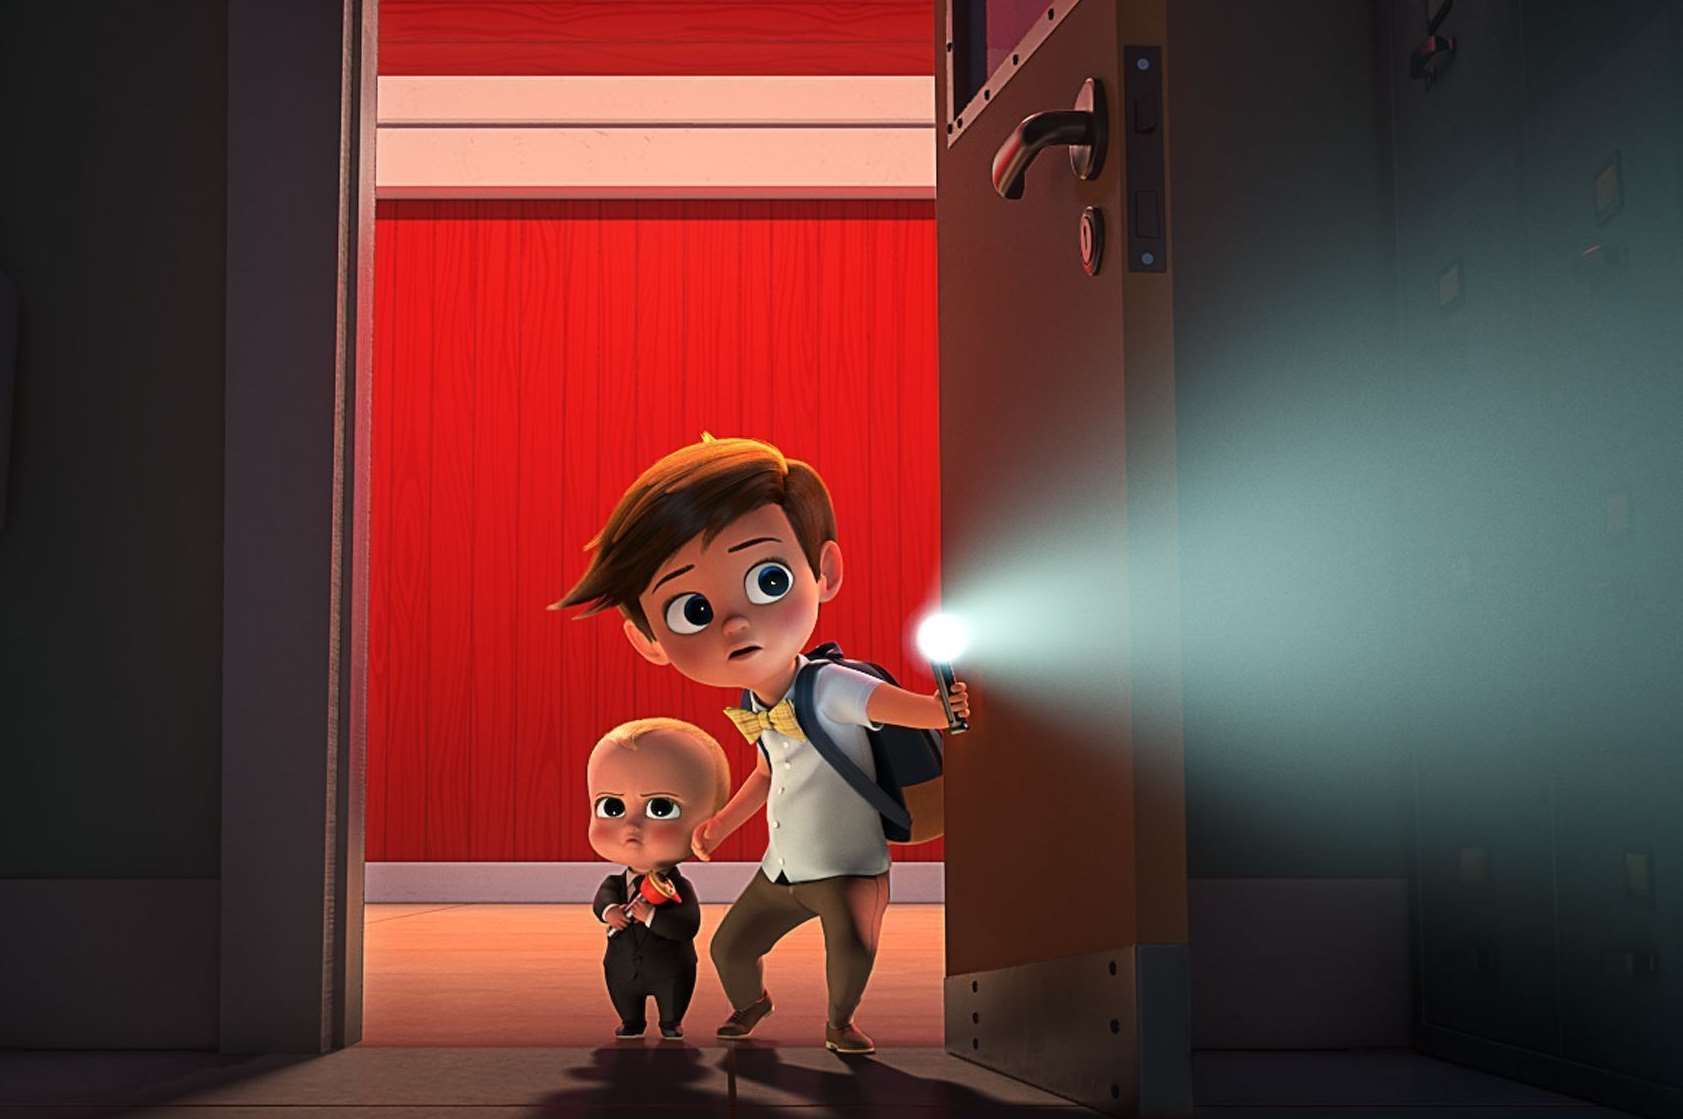 Boss Baby is one of the biggest films of the year to date